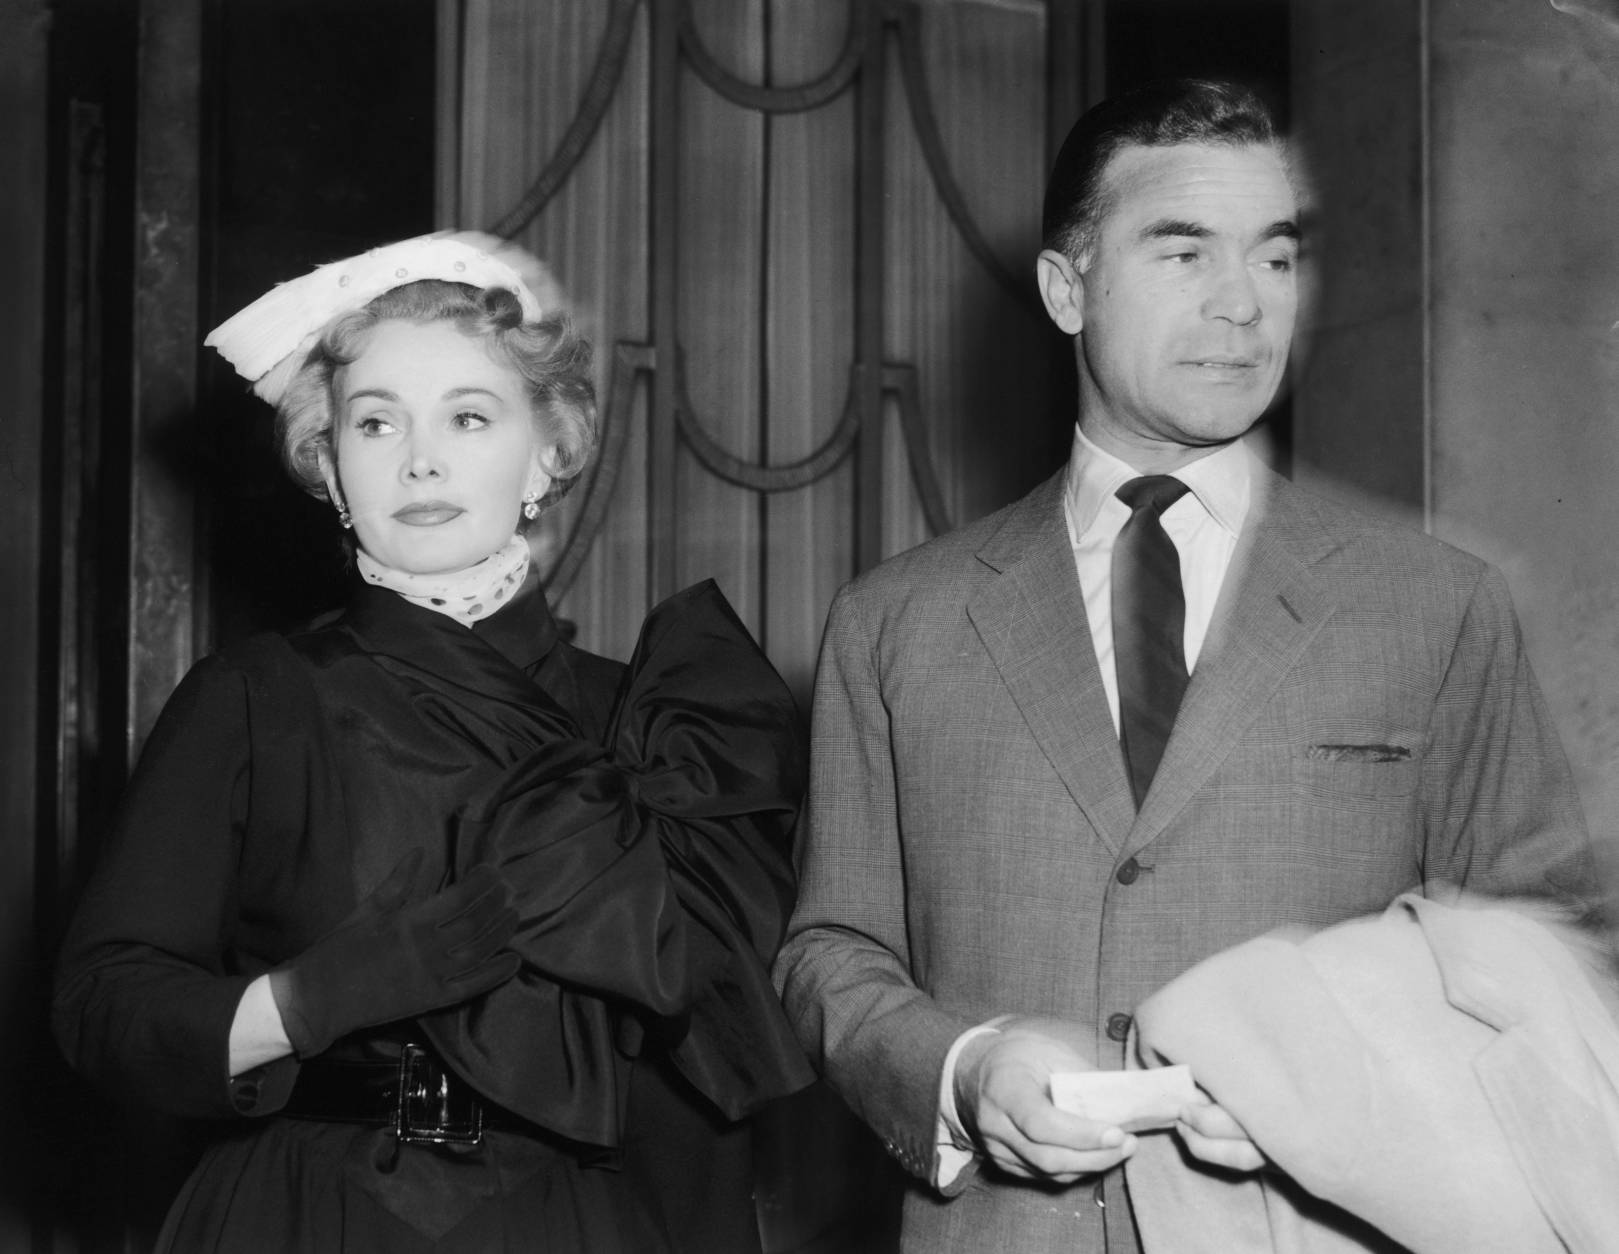 Hungarian actress Zsa Zsa Gabor with Dominican diplomat and playboy Porfirio Rubirosa (1909 - 1965) at Claridges Hotel in London, 29th April 1954. (Photo by Terry Fincher/Keystone/Hulton Archive/Getty Images)